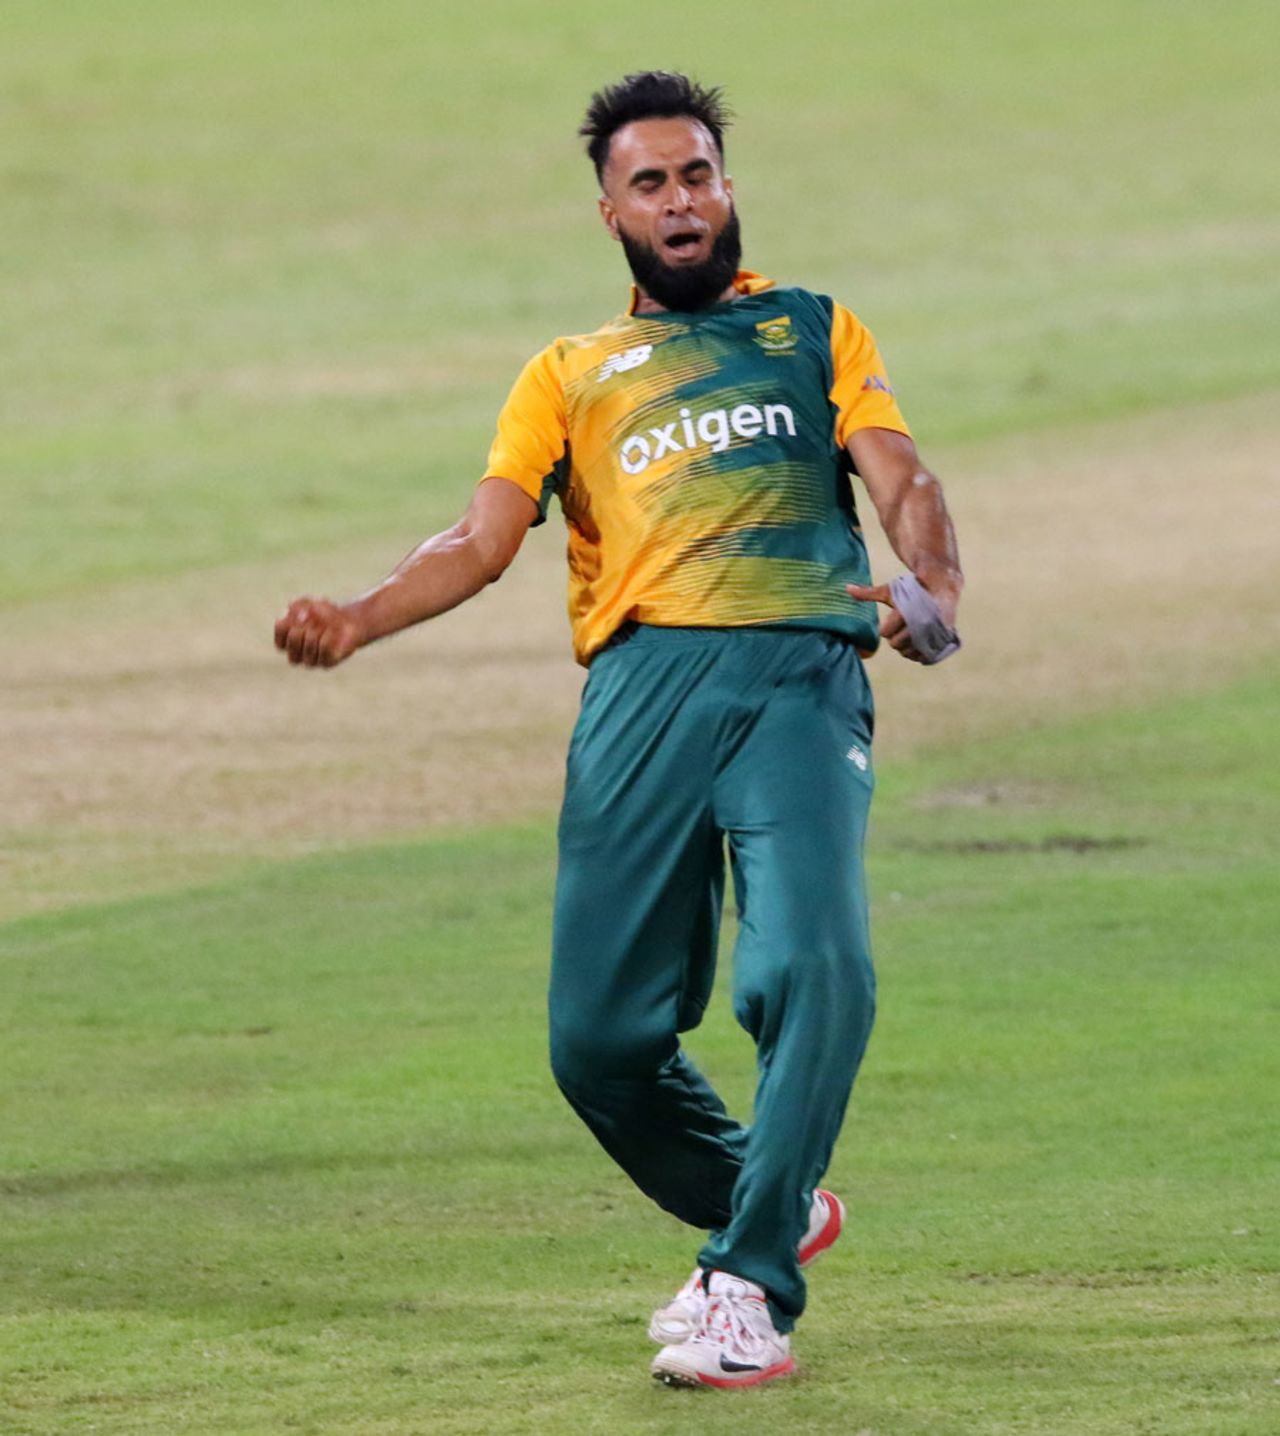 Imran Tahir removed the danger man Aaron Finch, South Africa v Australia, 1st T20, Durban, March 4, 2016